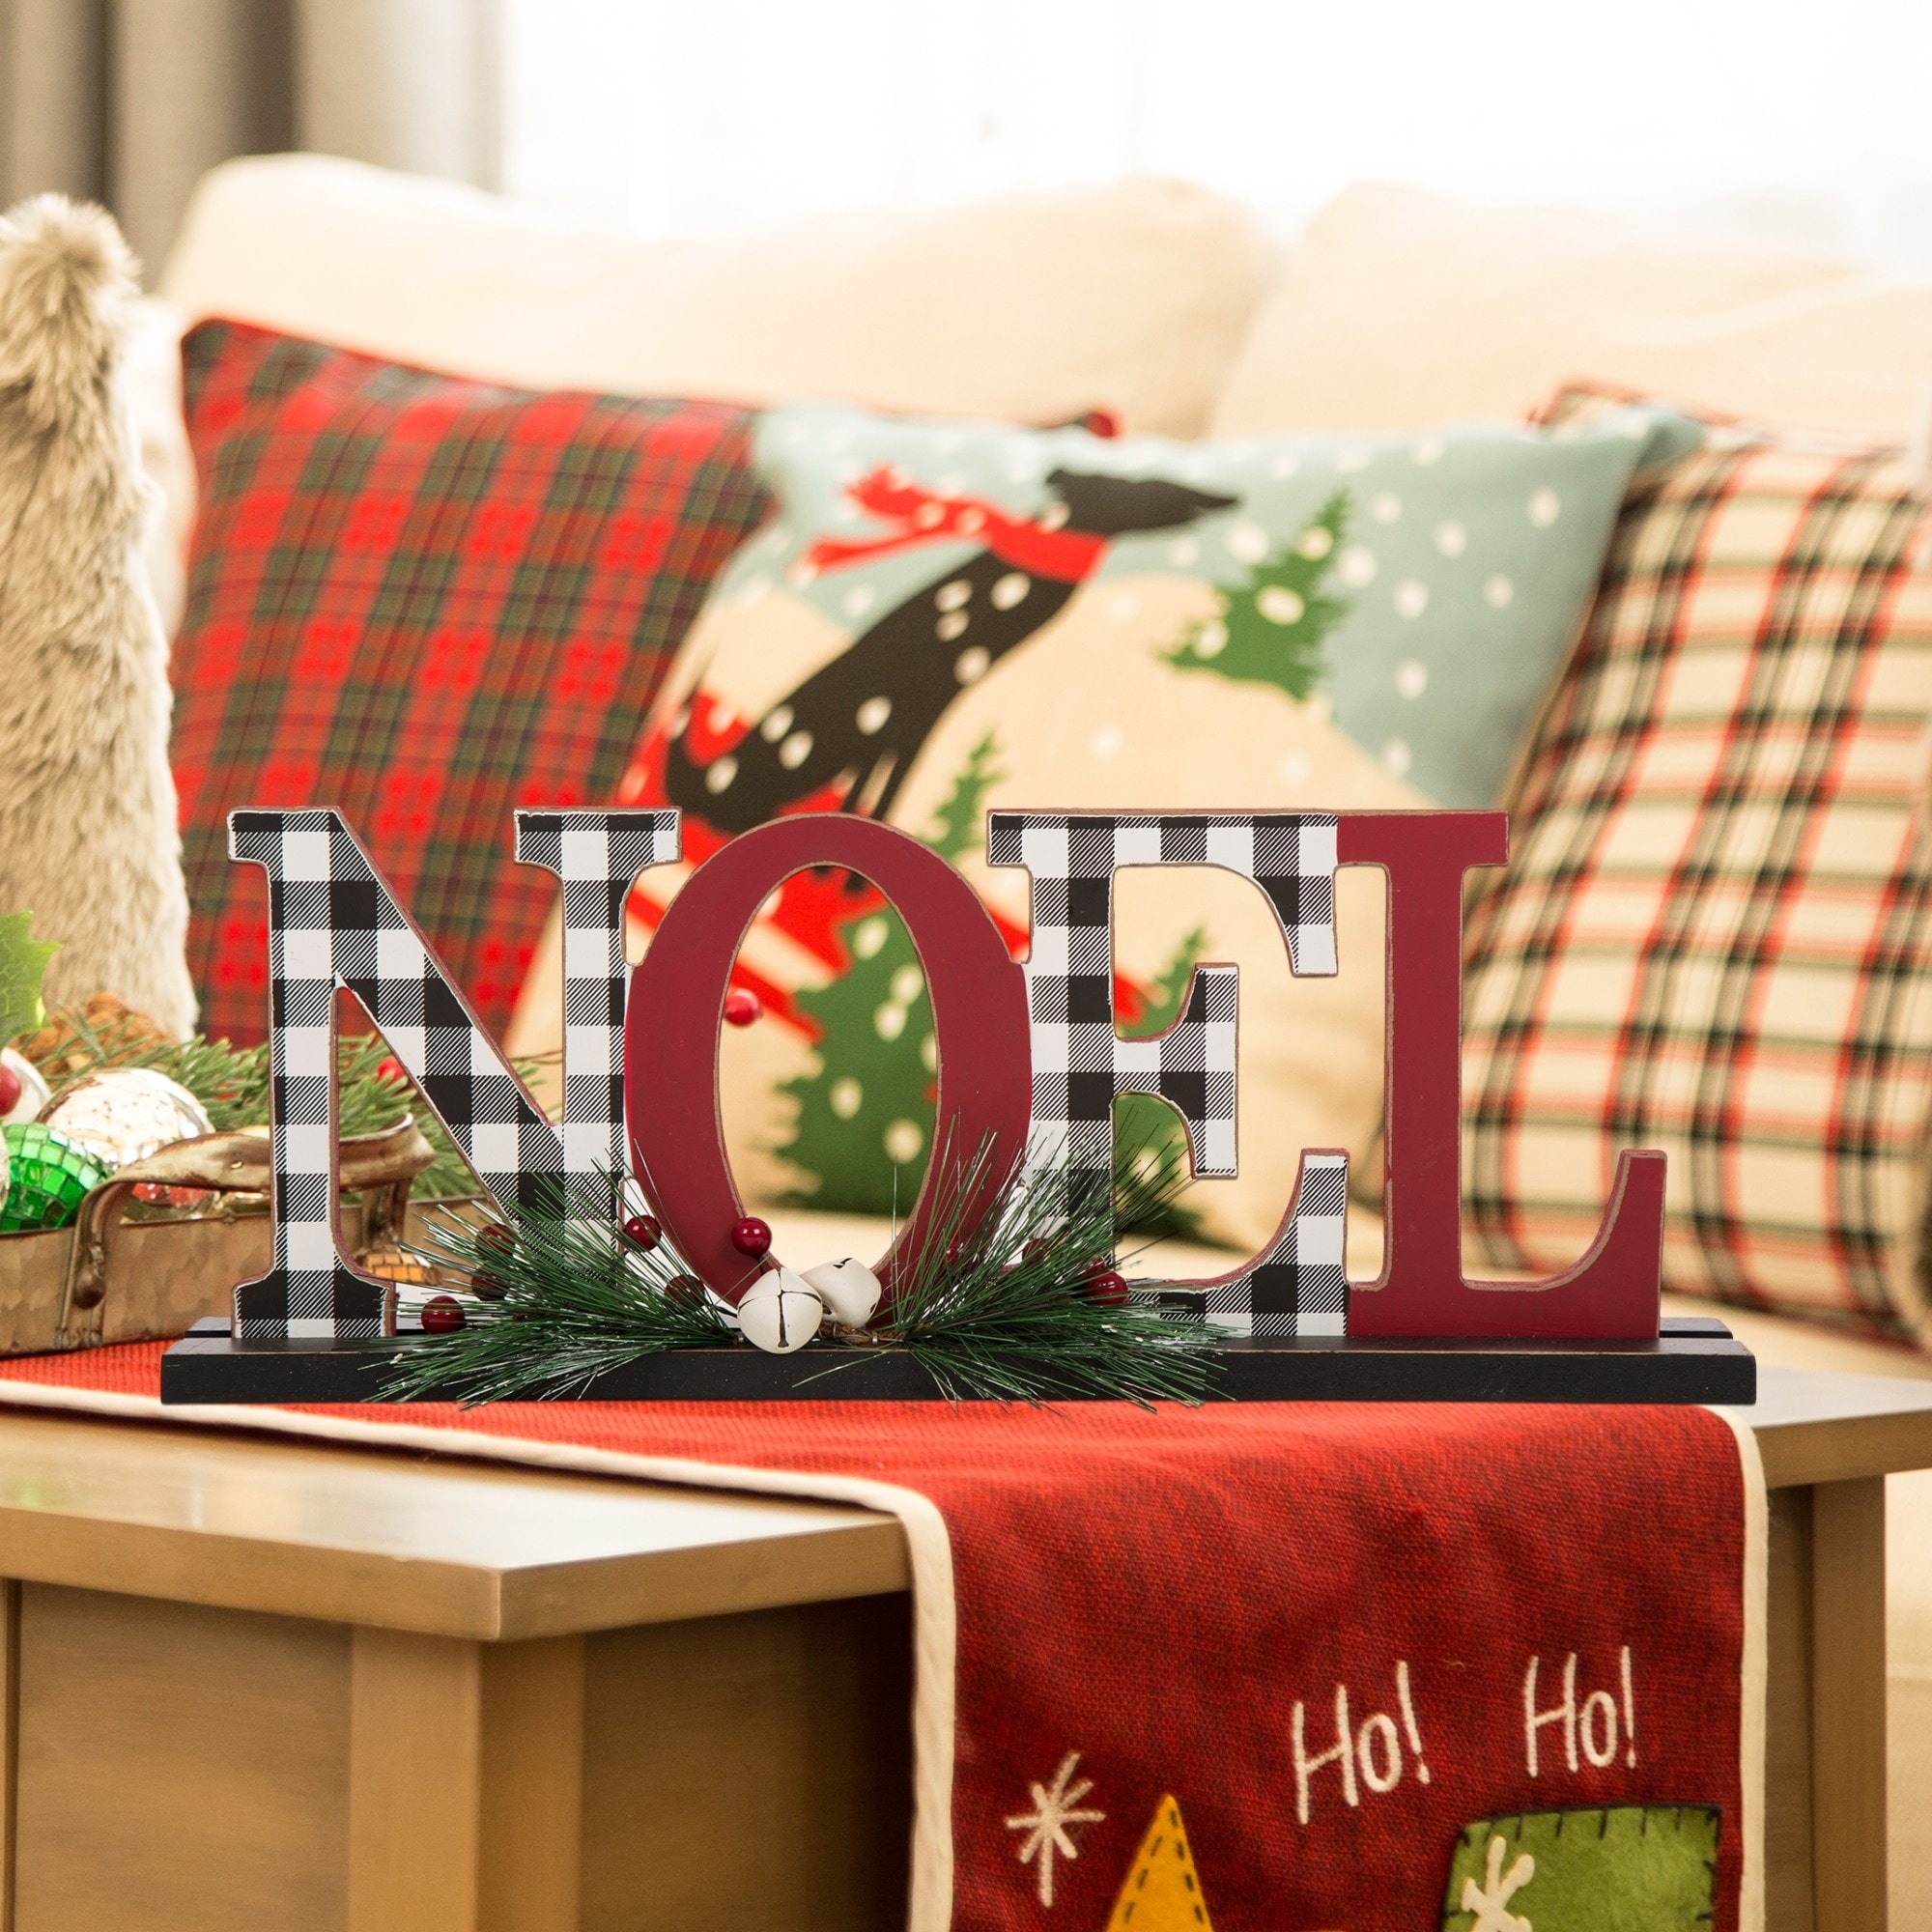 https://ak1.ostkcdn.com/images/products/is/images/direct/ceabe70ea57d2579fc2a4c0ed59f3052ba76feb5/Glitzhome-Christmas-Wooden-Word-Table-Decor.jpg